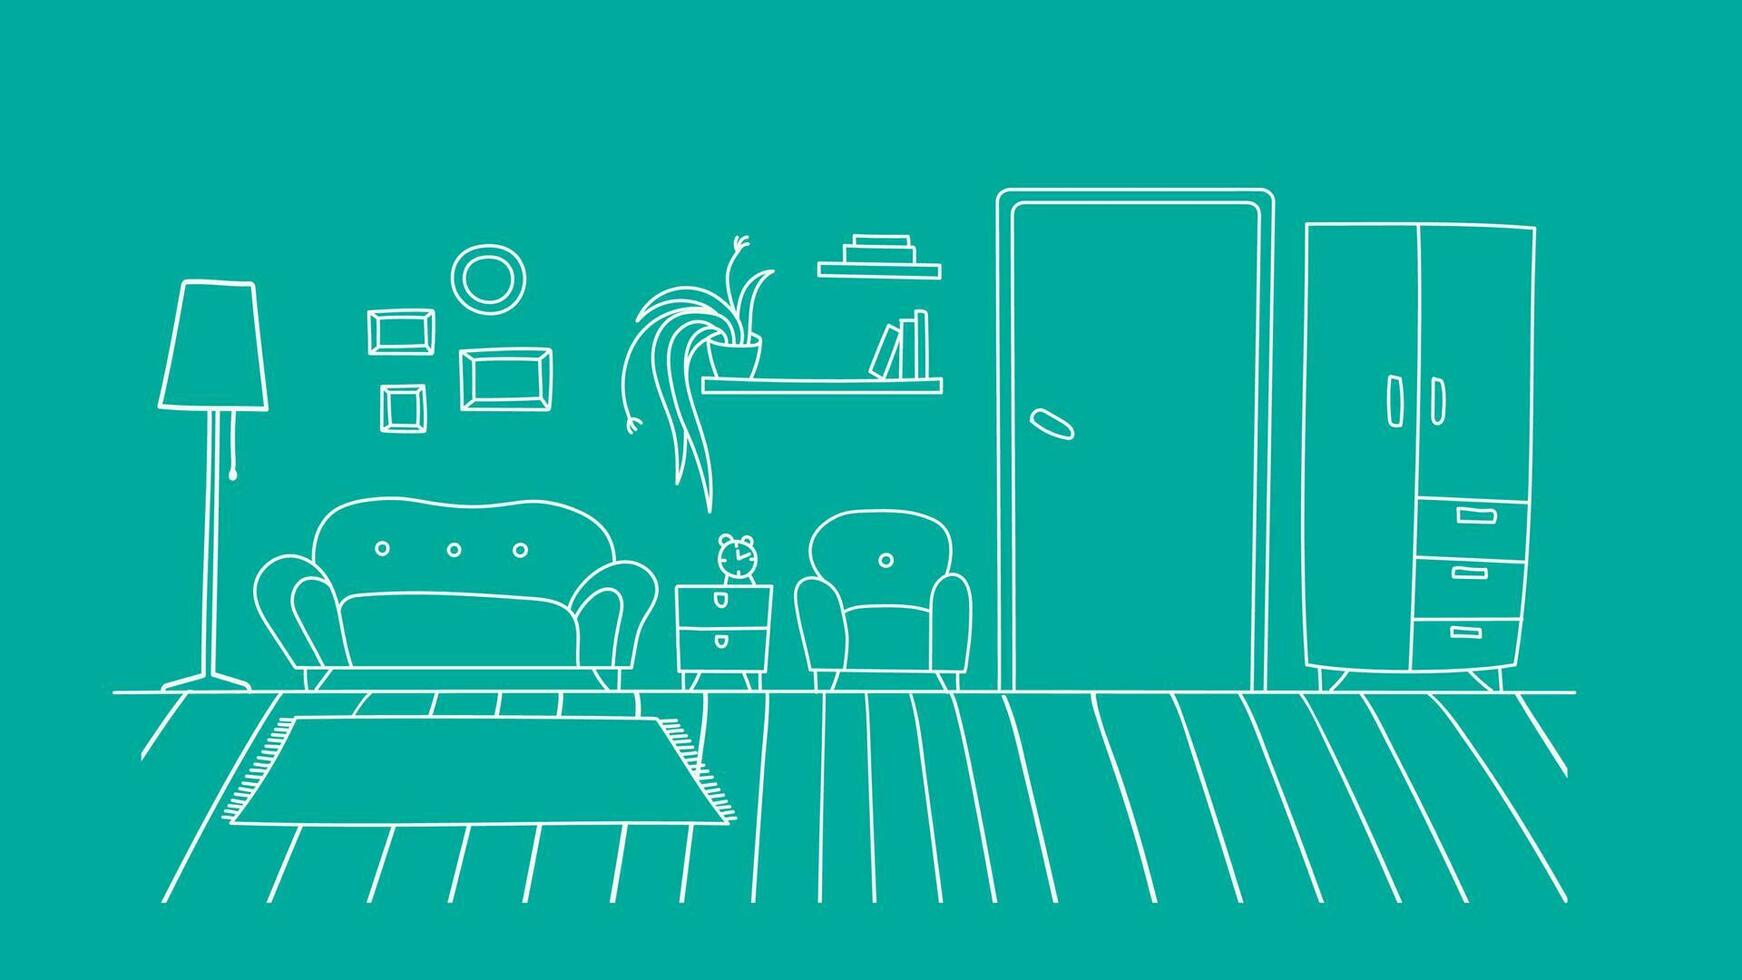 Living room interior flat simple. Linear outlines of furniture. Monochrome vector illustration. Green background, white lines.